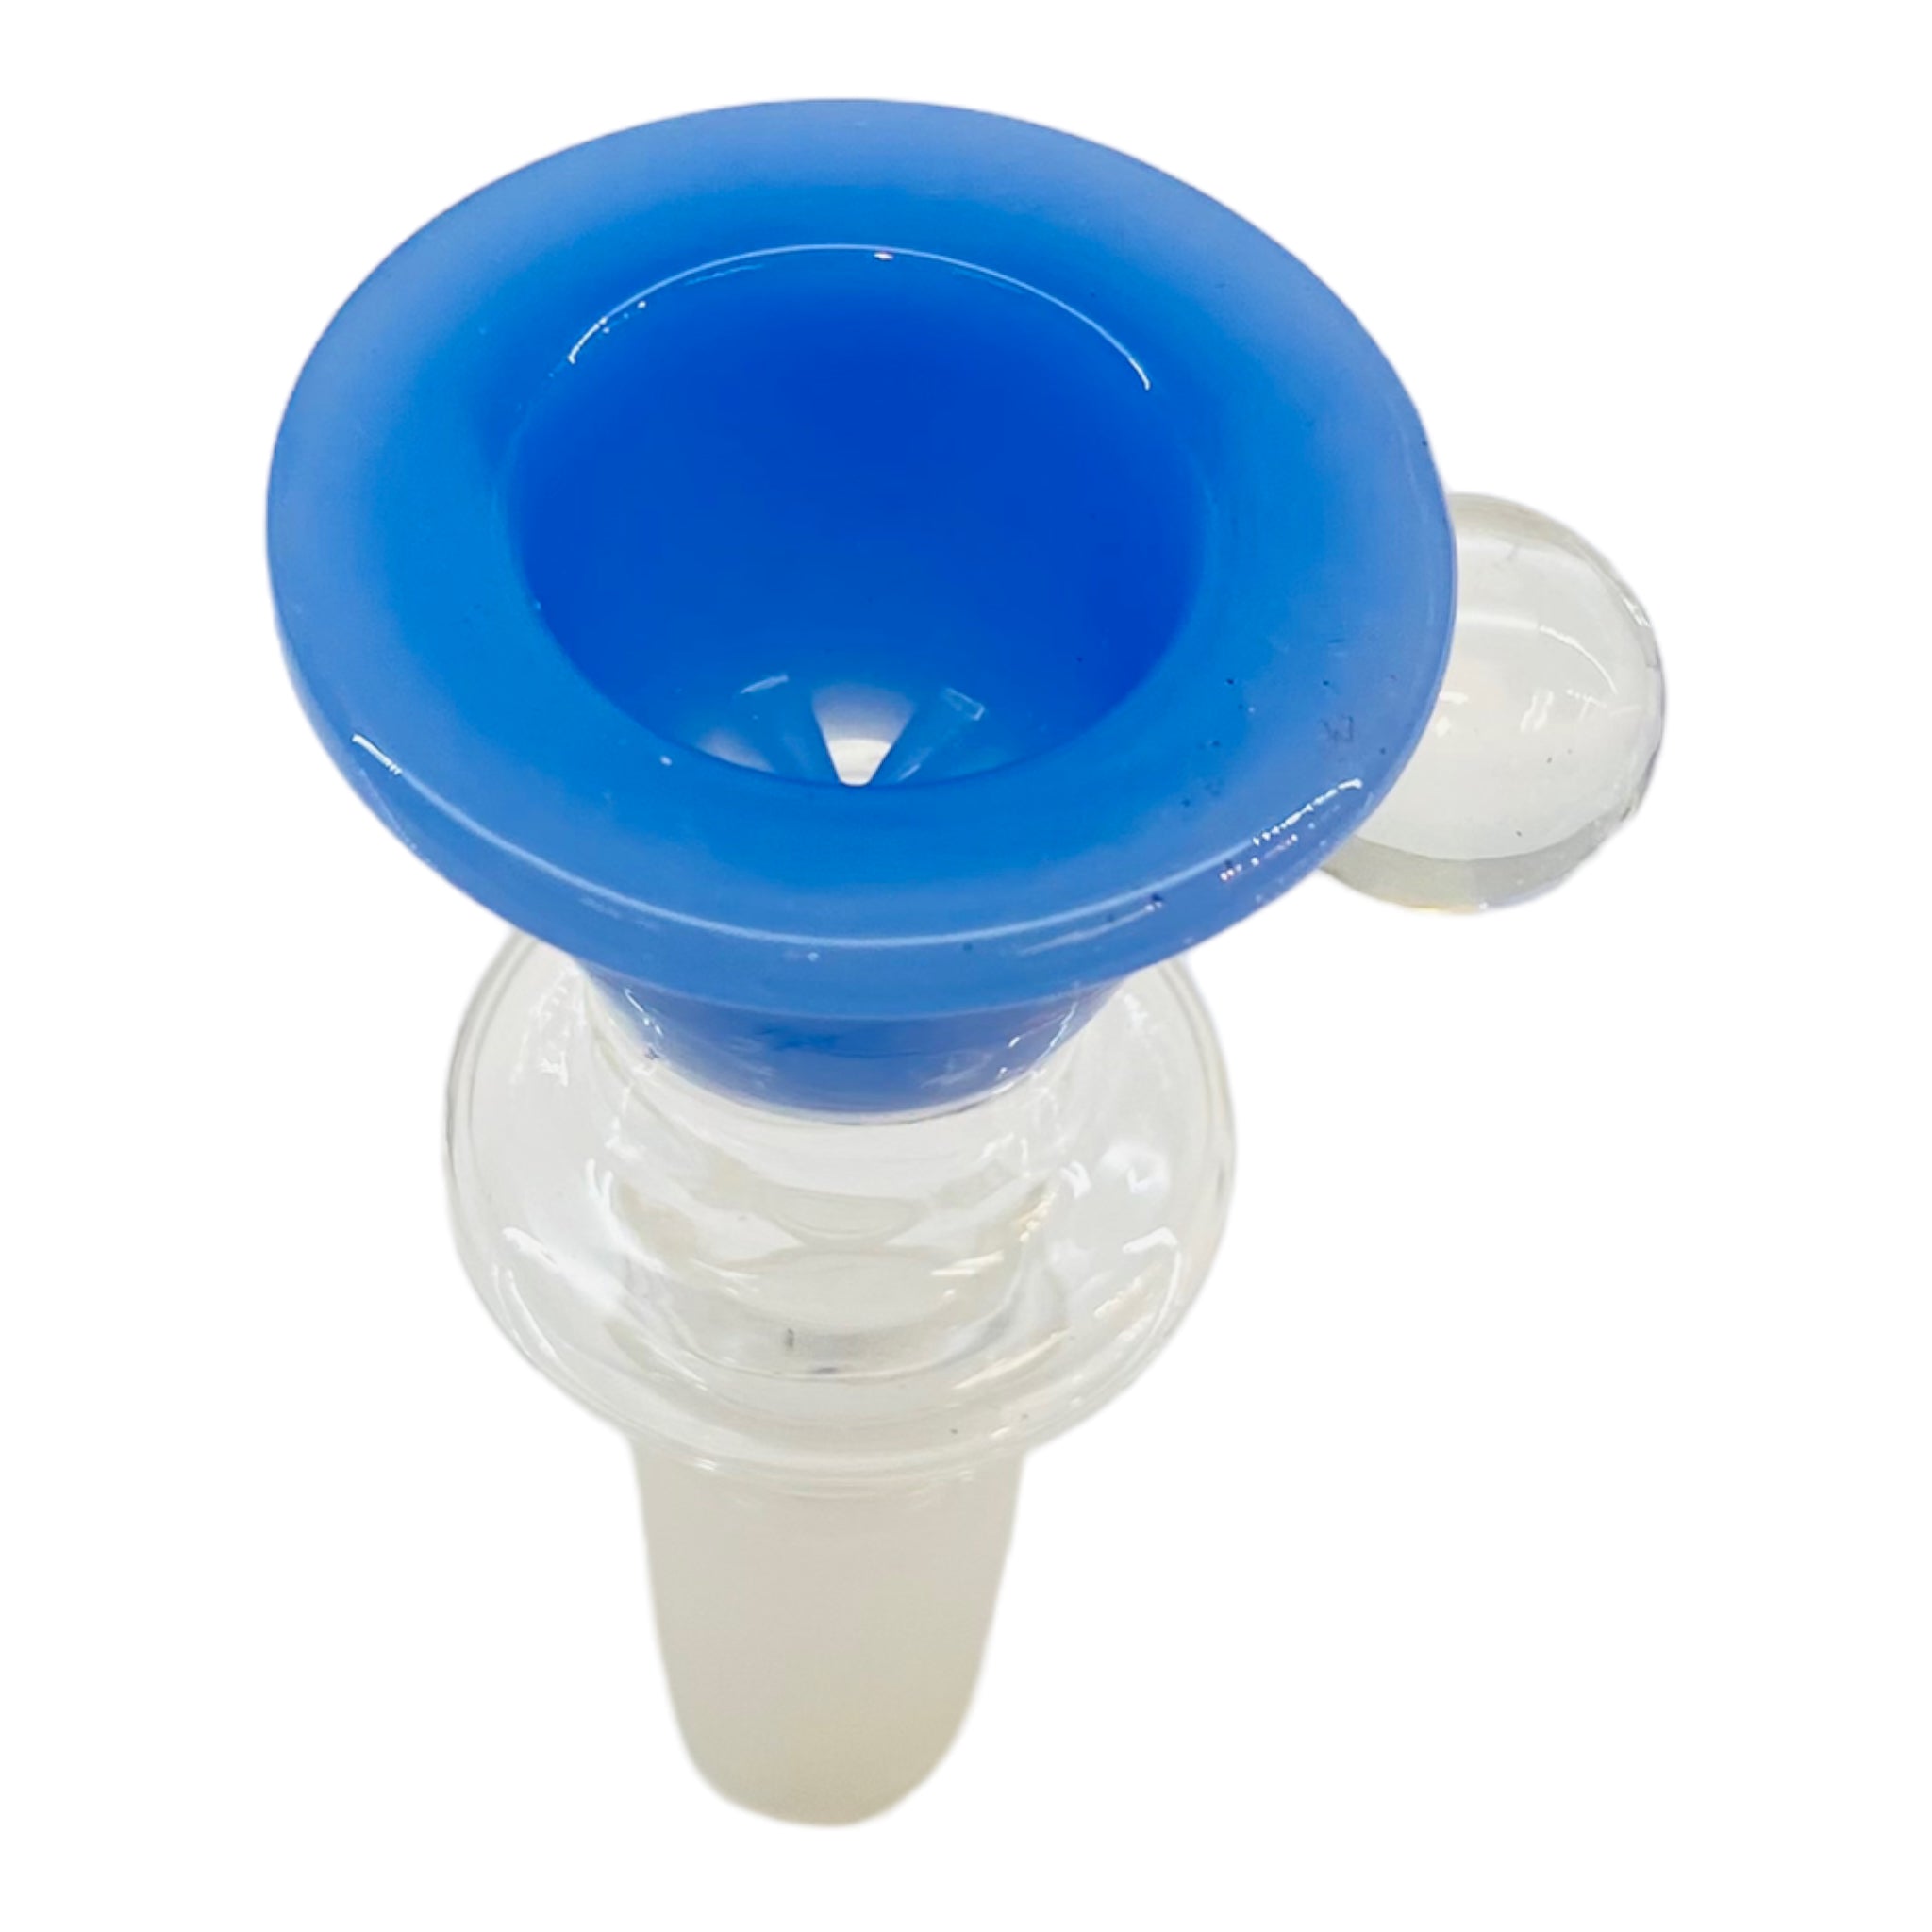 14mm Flower Bowl - Large Martini Funnel Bong Bowl Piece With Built In Screen - Baby Blue